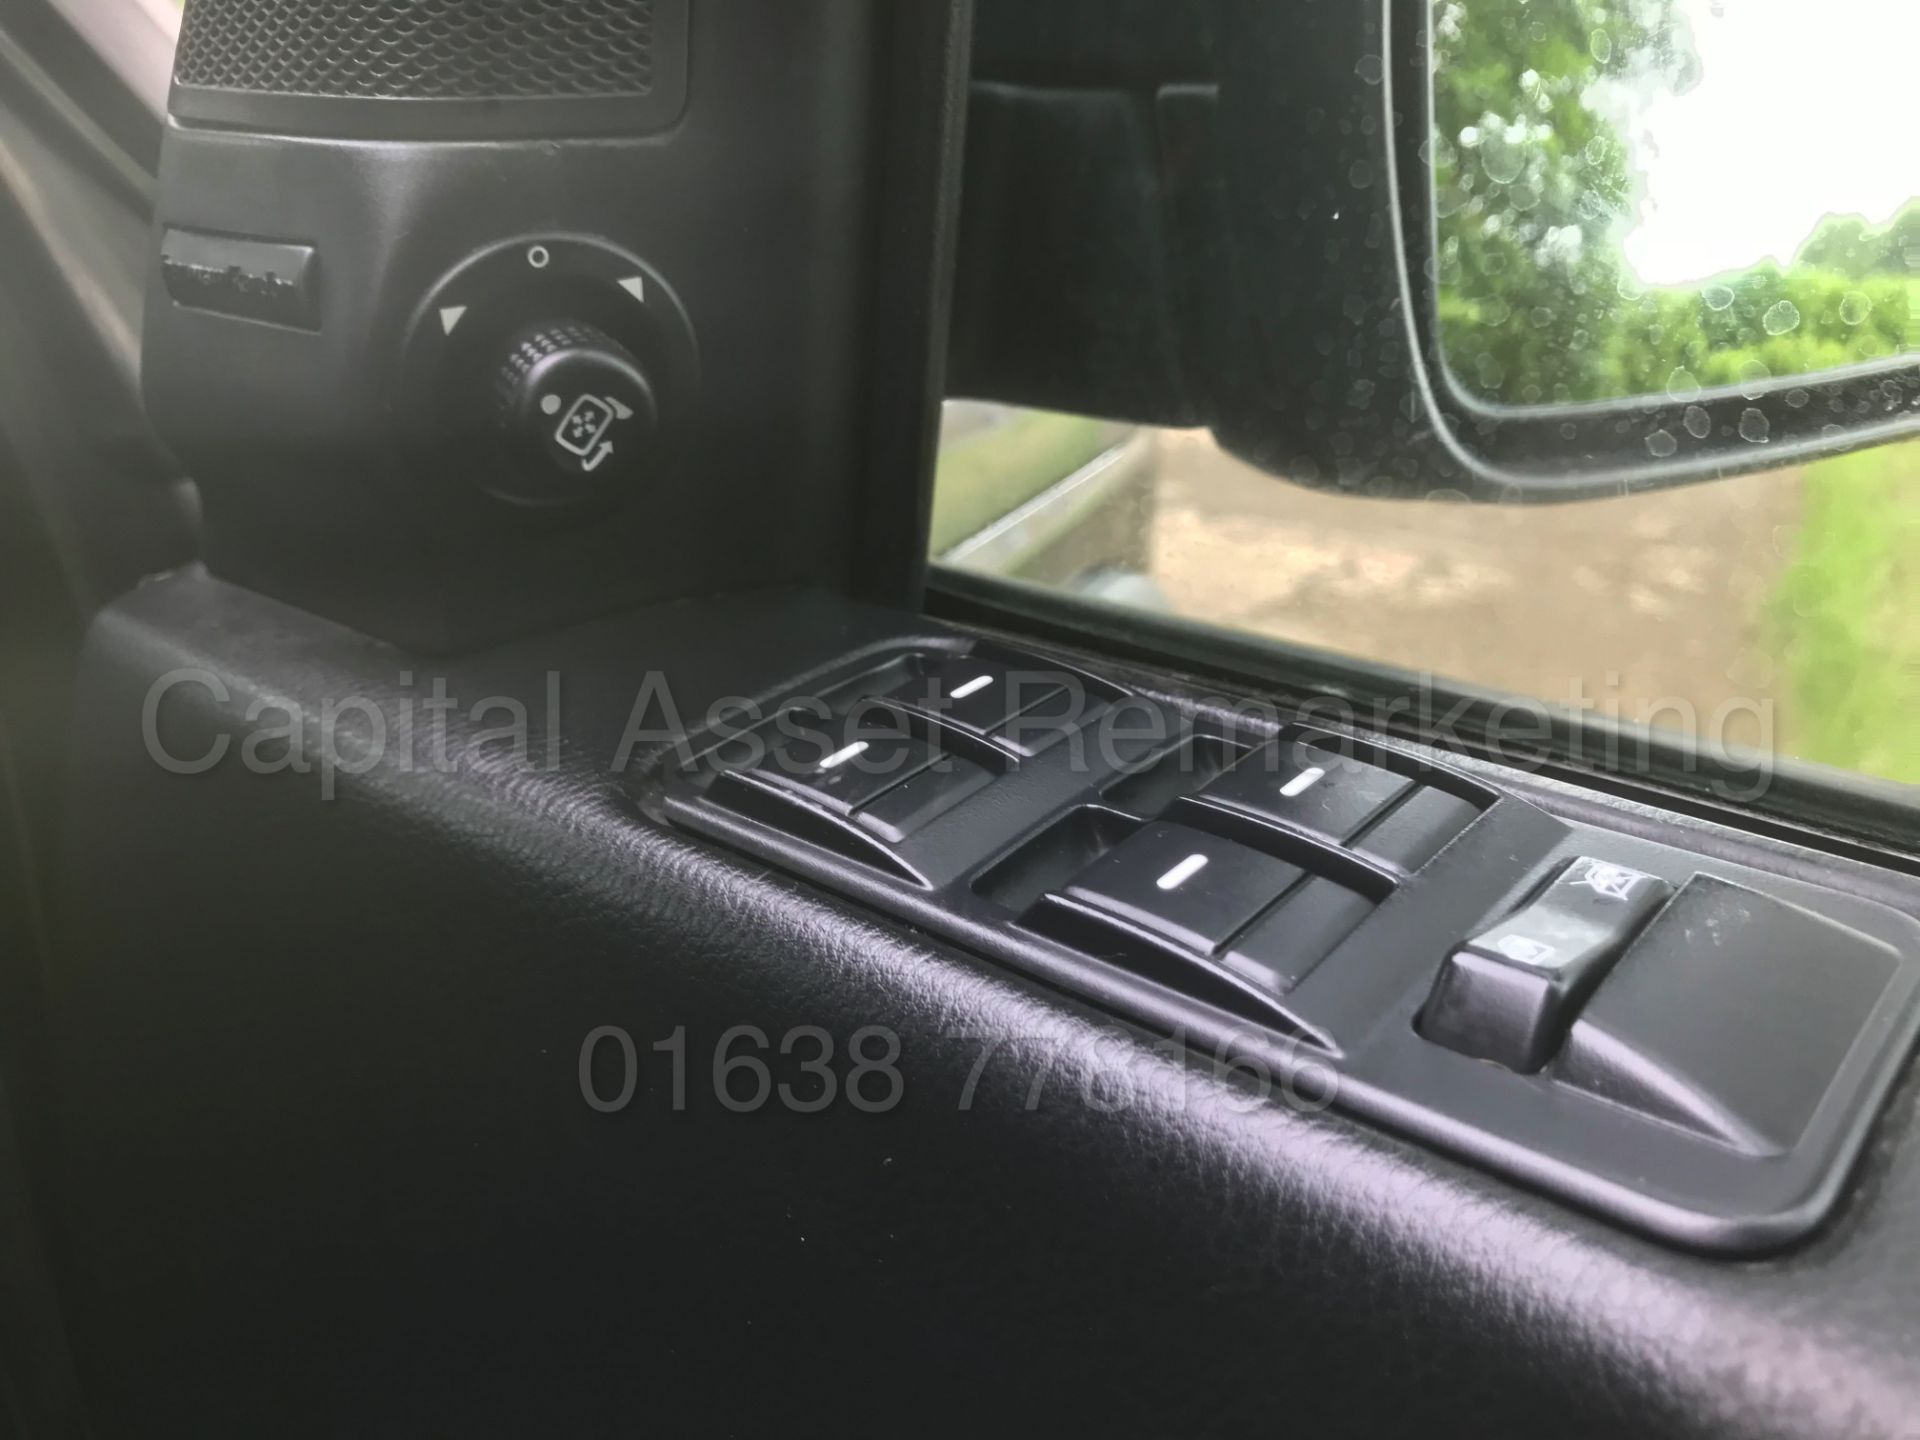 (On Sale) LAND ROVER DISCOVERY 3 'XS EDITION' **COMMERCIAL VAN**(2008 MODEL) 'TDV6-190 BHP' (NO VAT) - Image 28 of 38